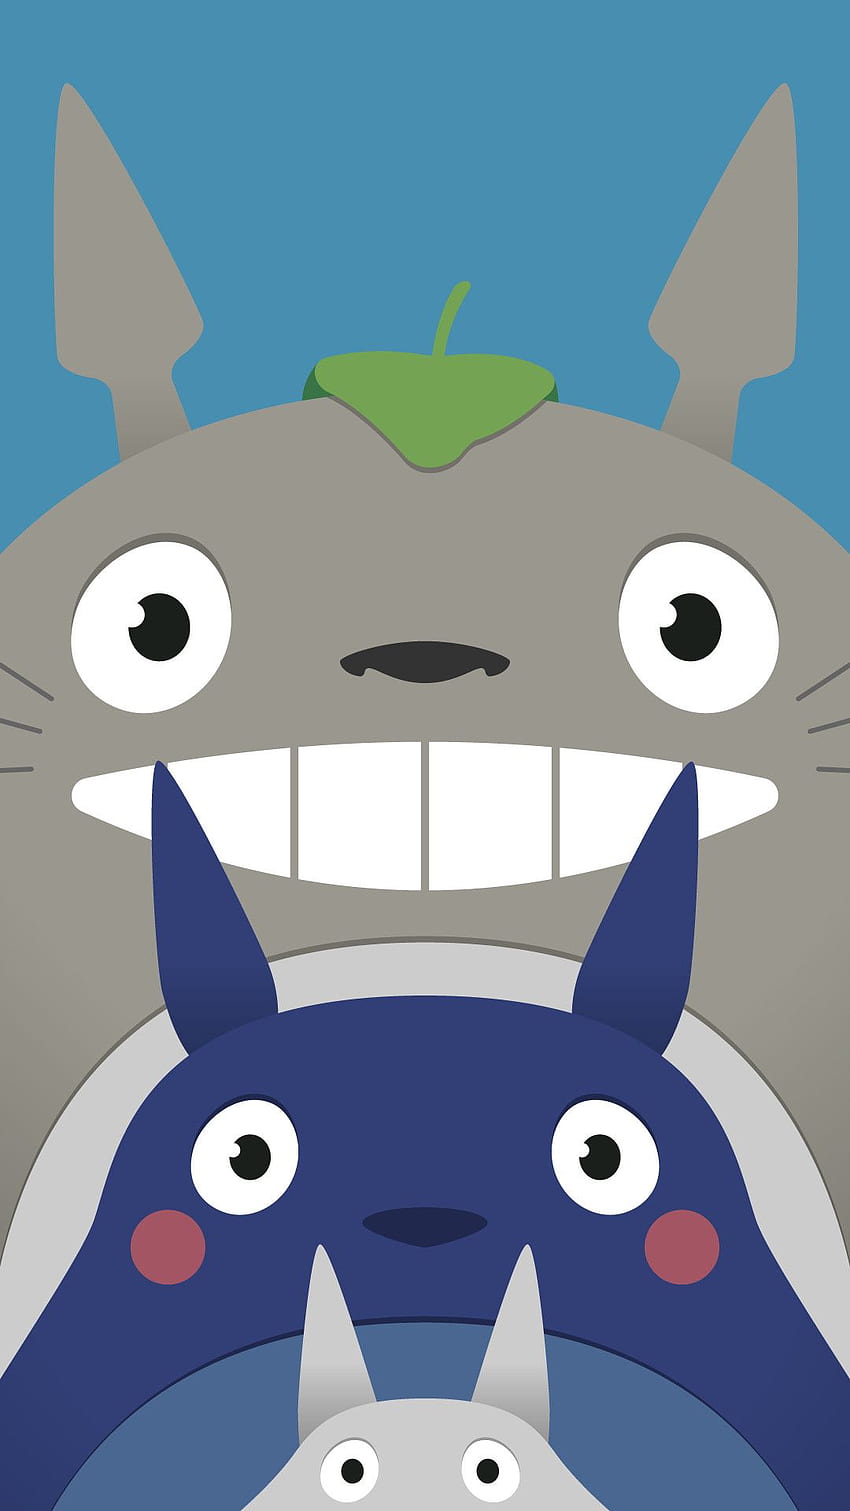 The Idea King  Totoro wallpaper for phone   Facebook